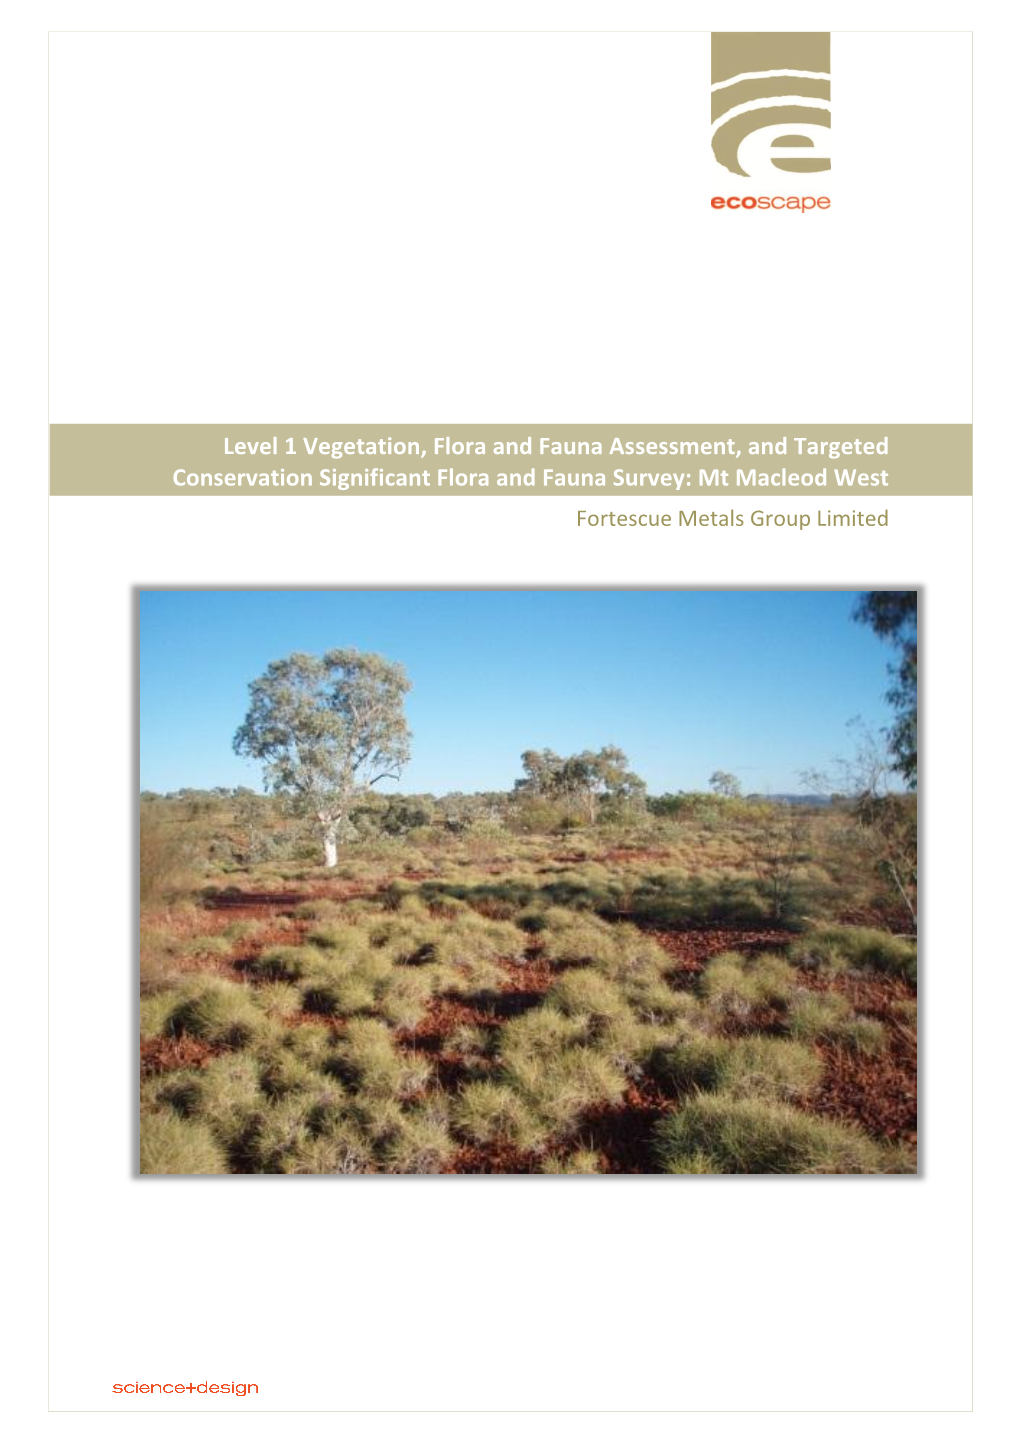 Level 1 Vegetation, Flora and Fauna Assessment, and Targeted Conservation Significant Flora and Fauna Survey: Mt Macleod West Fortescue Metals Group Limited